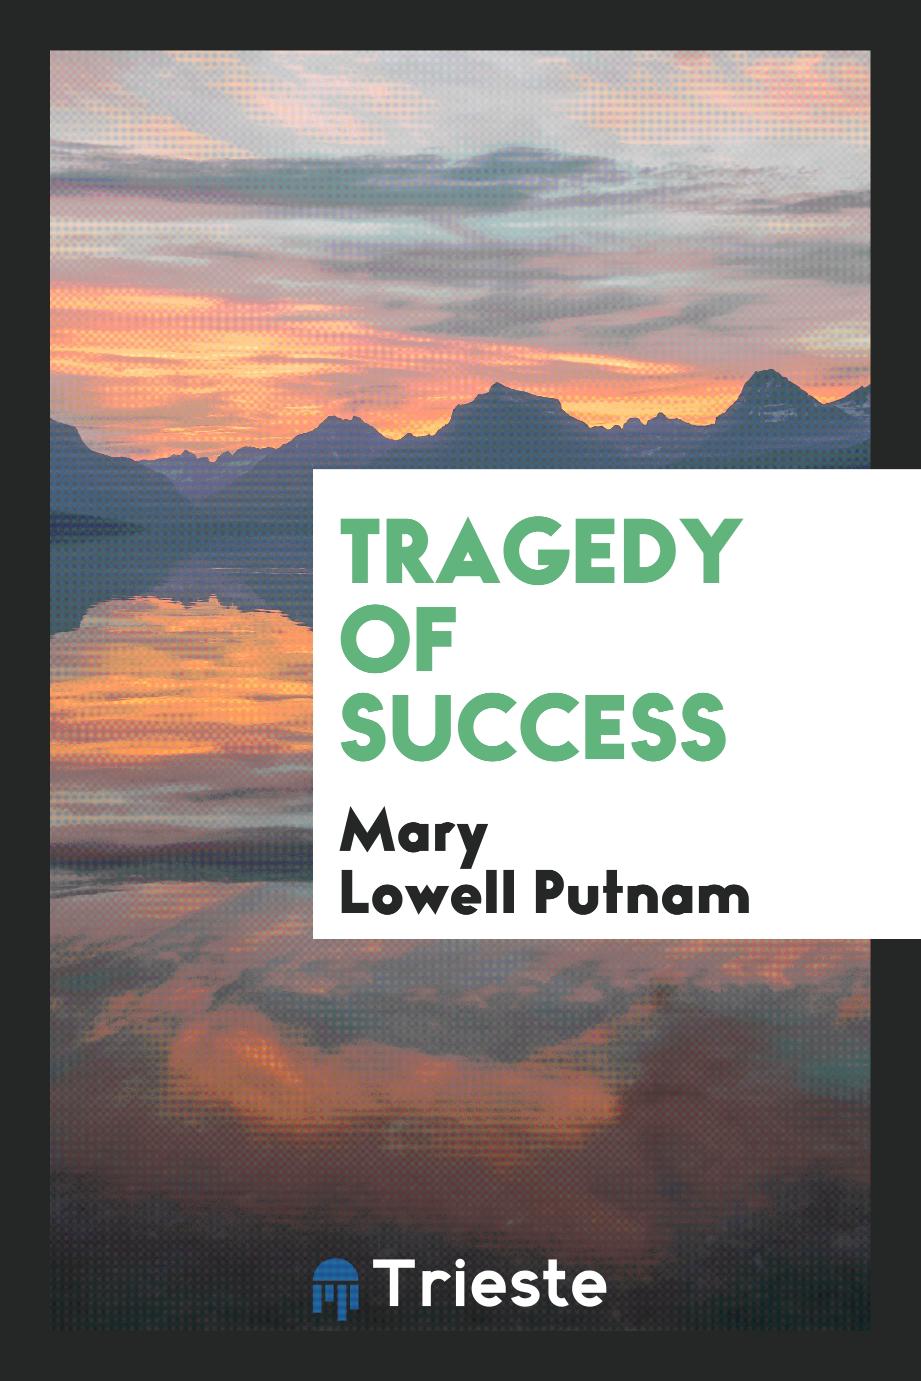 Tragedy of success